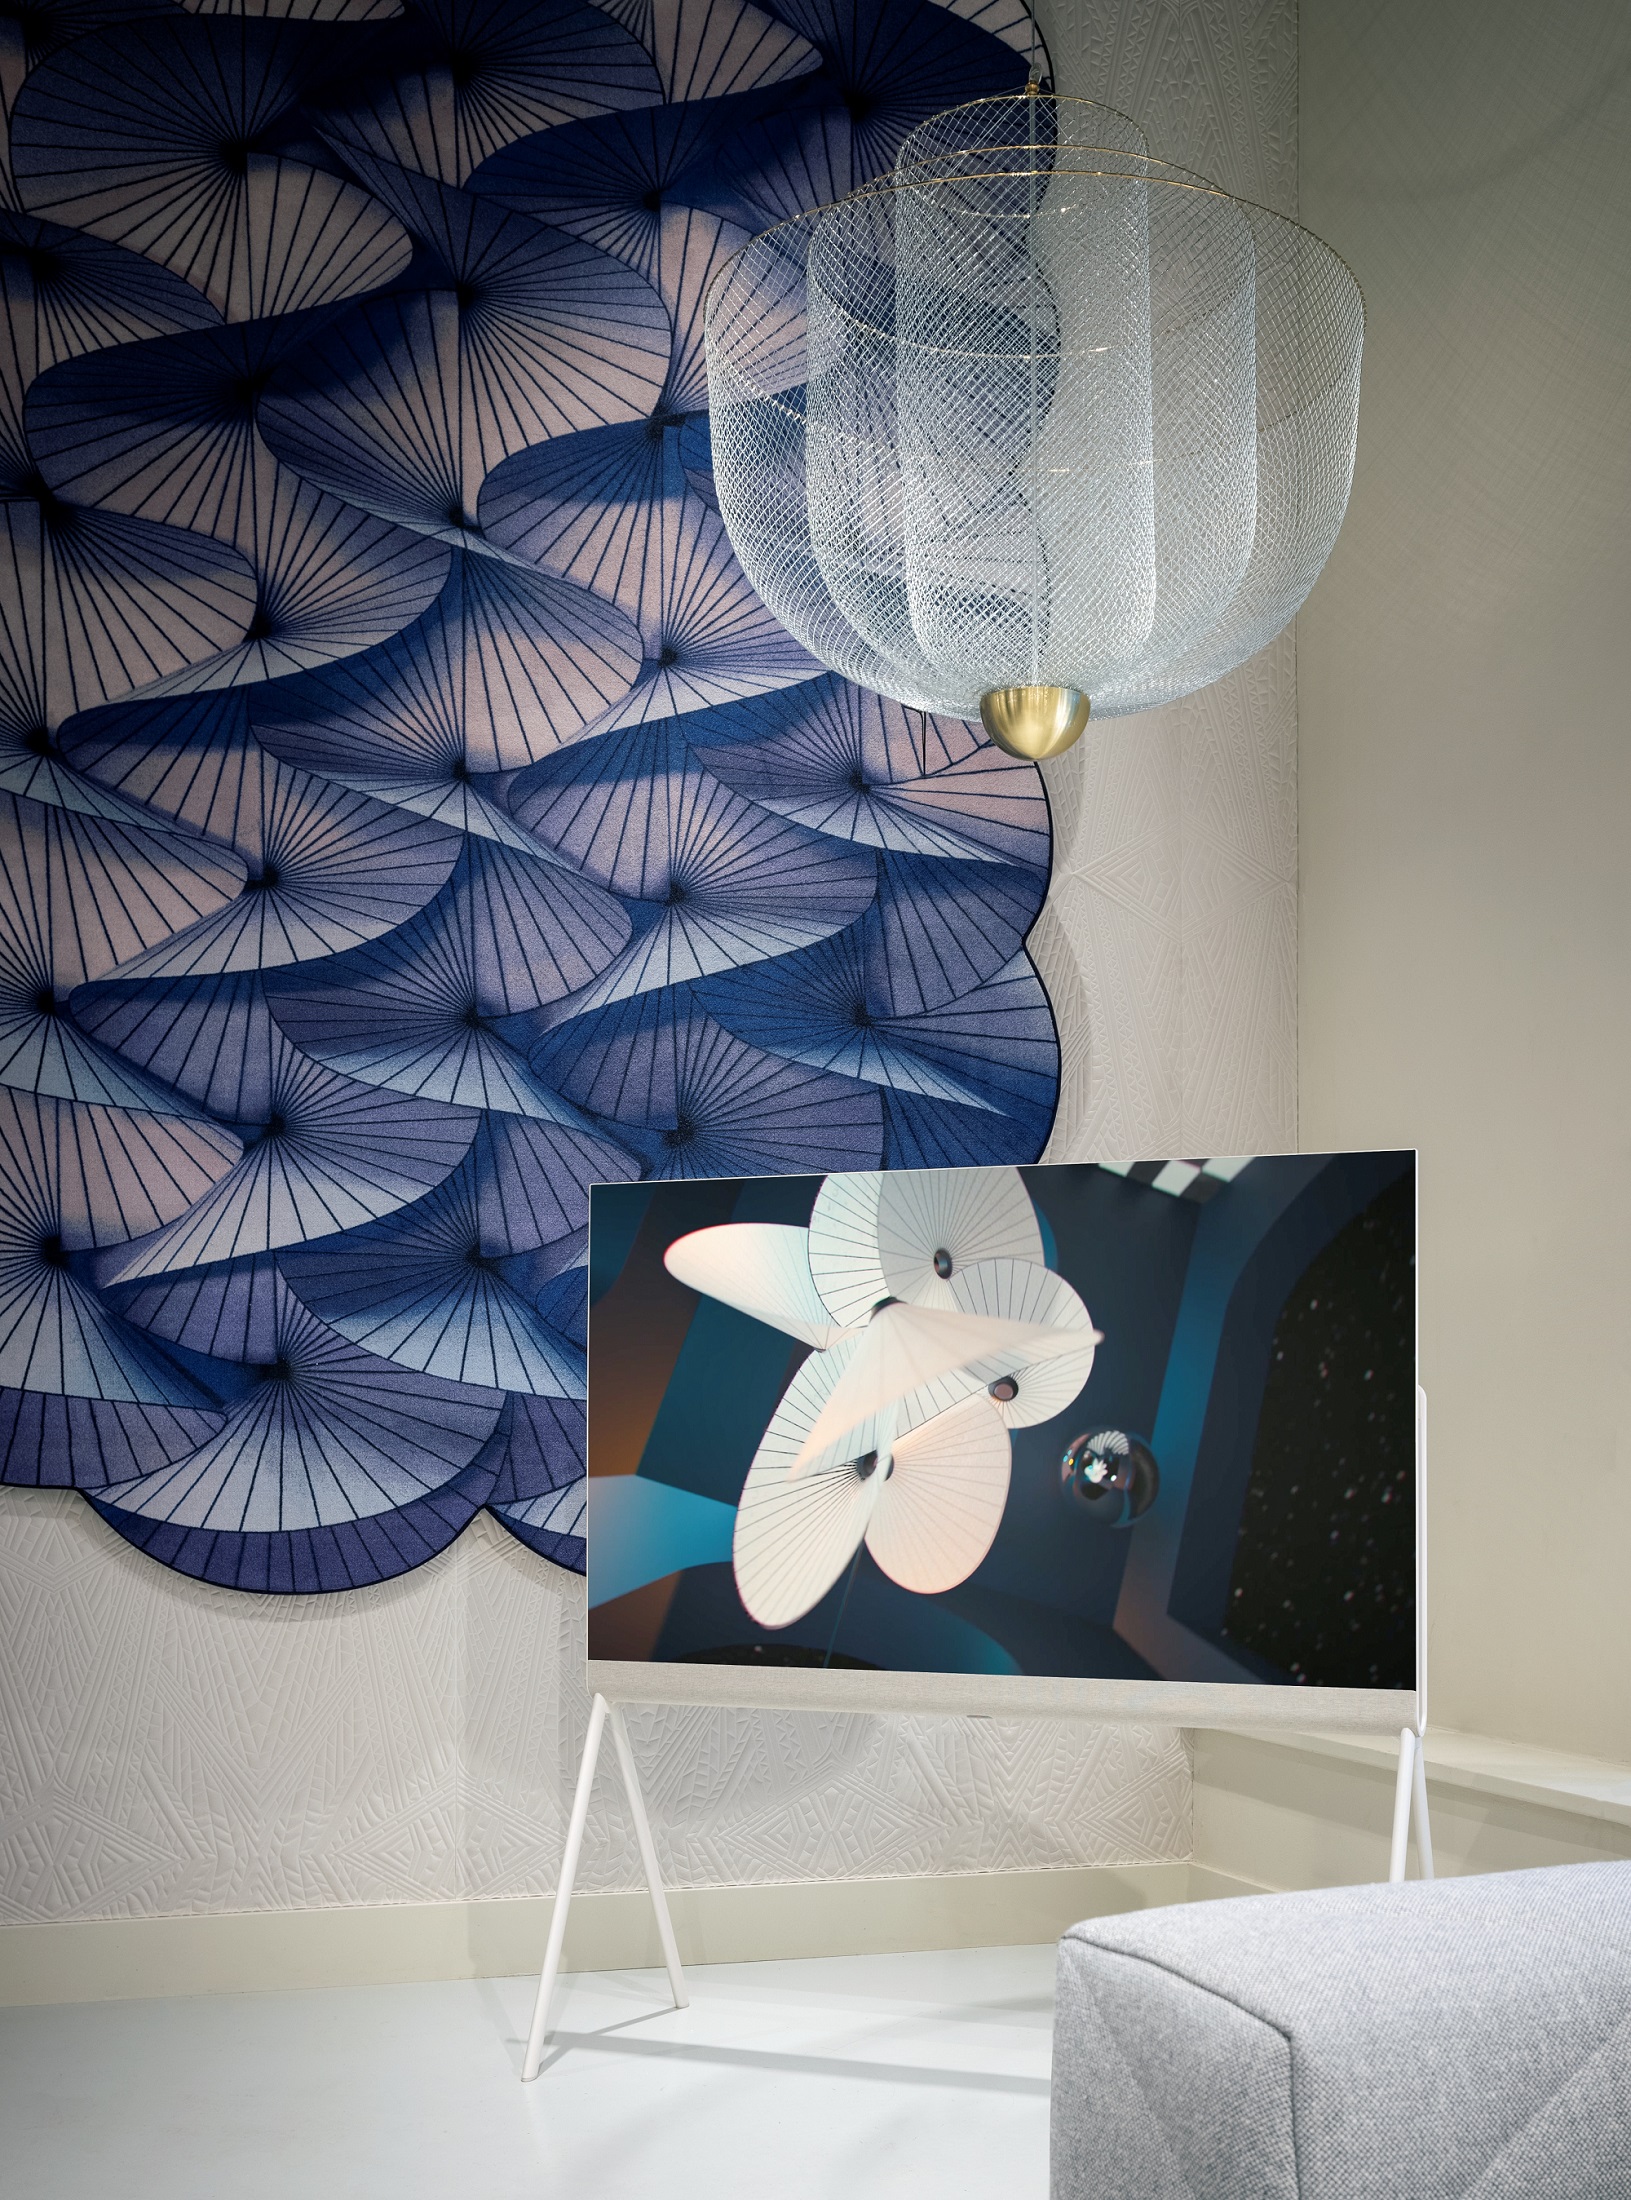 LG OLED Objet Collection Posé displaying artwork in a room with an elegant chandelier and blue-themed wall artwork